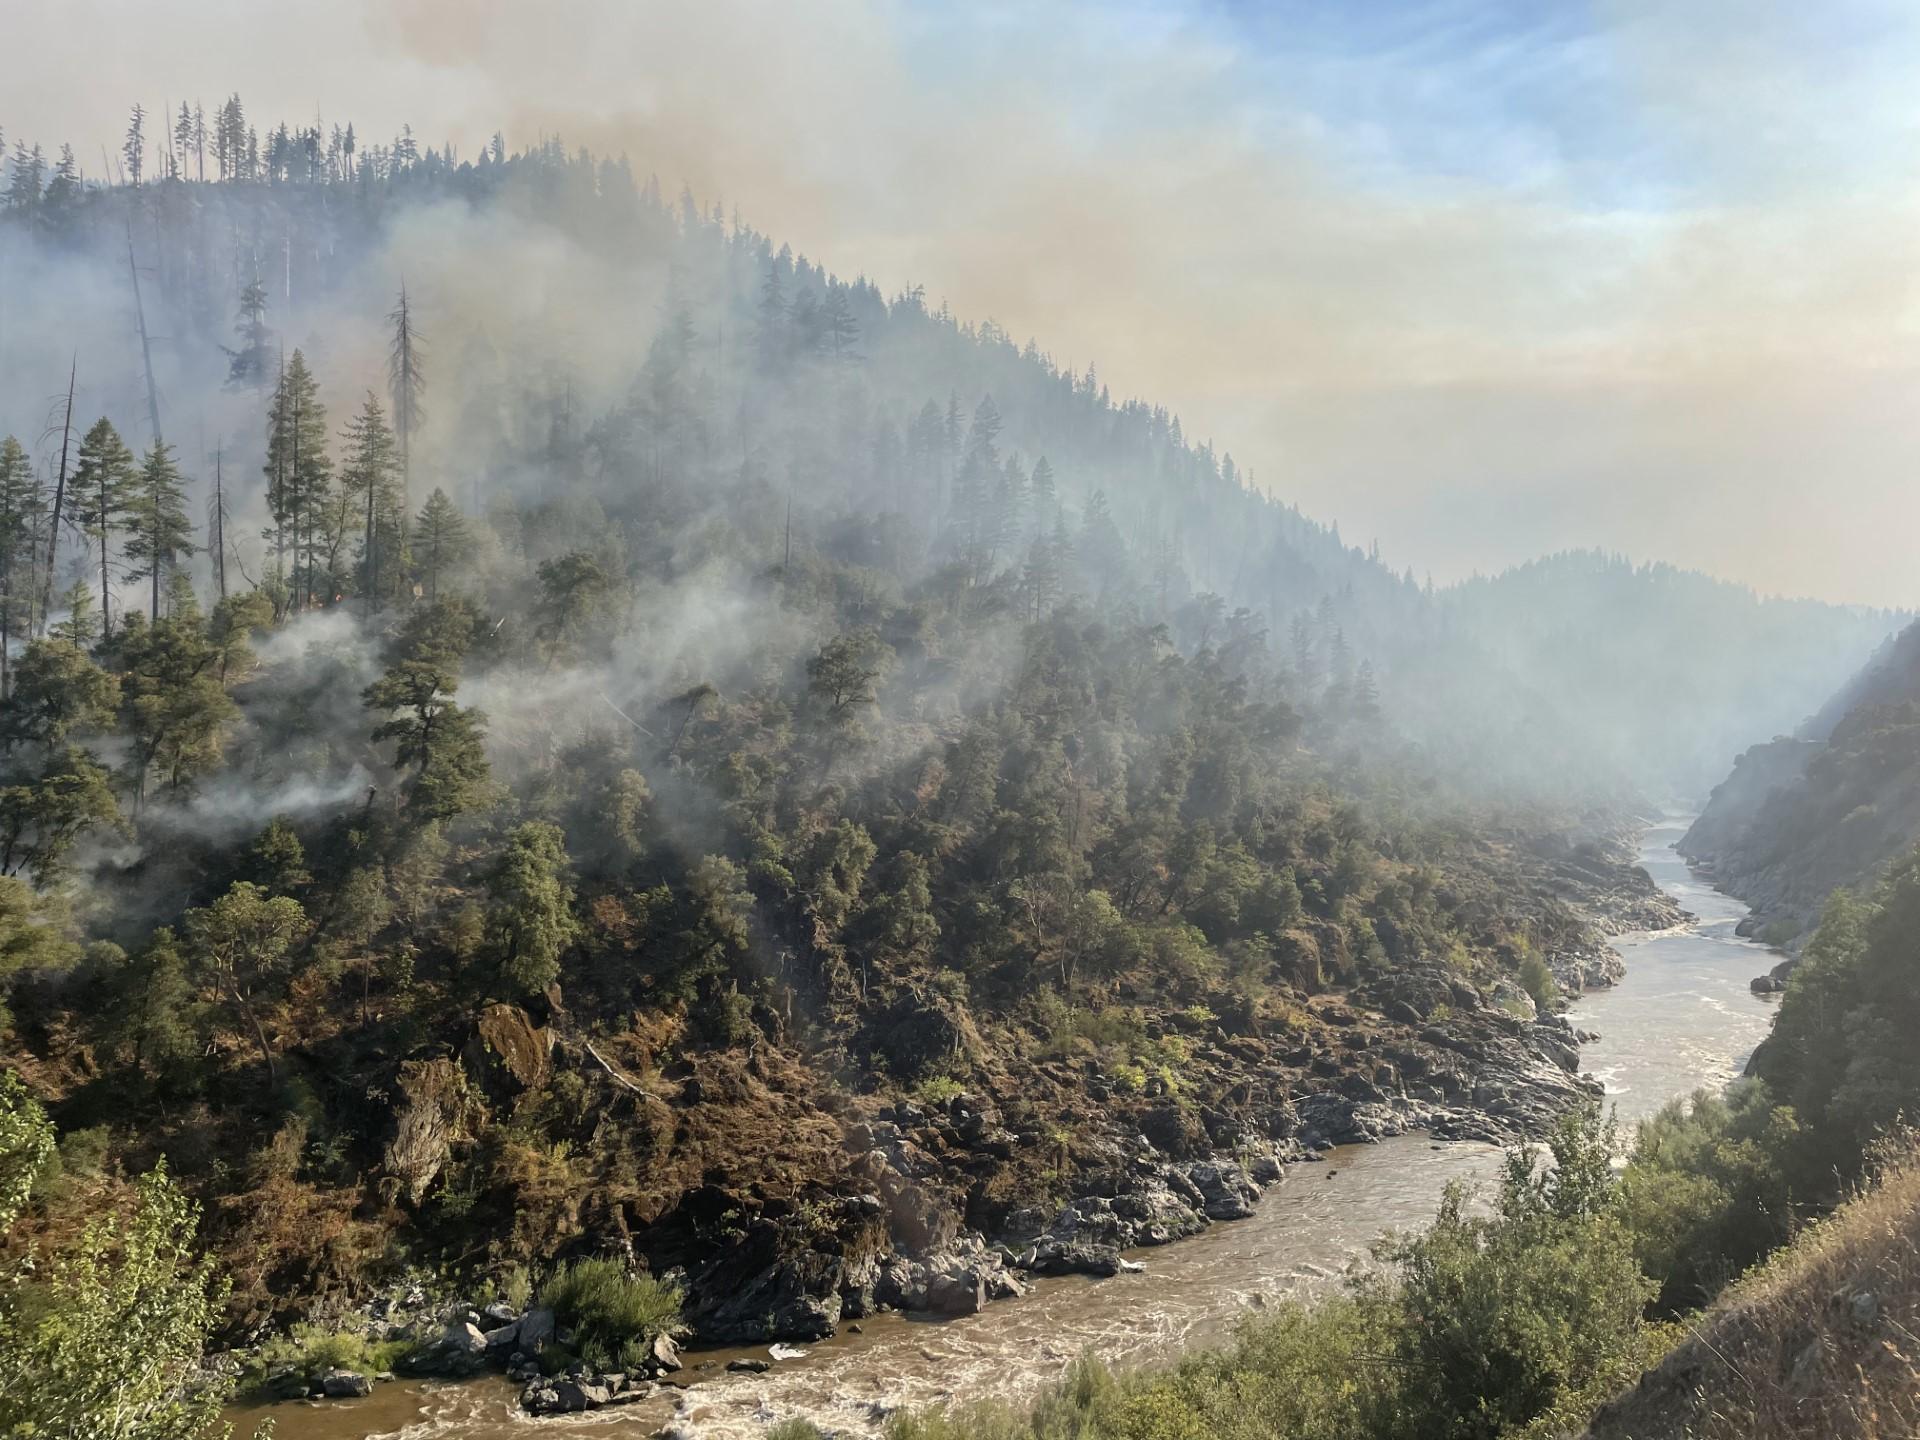 Image of the Klamath River with fire burning under the trees on the steep slopes across the river. Photo USDA Forest Service courtesy Shane McCann